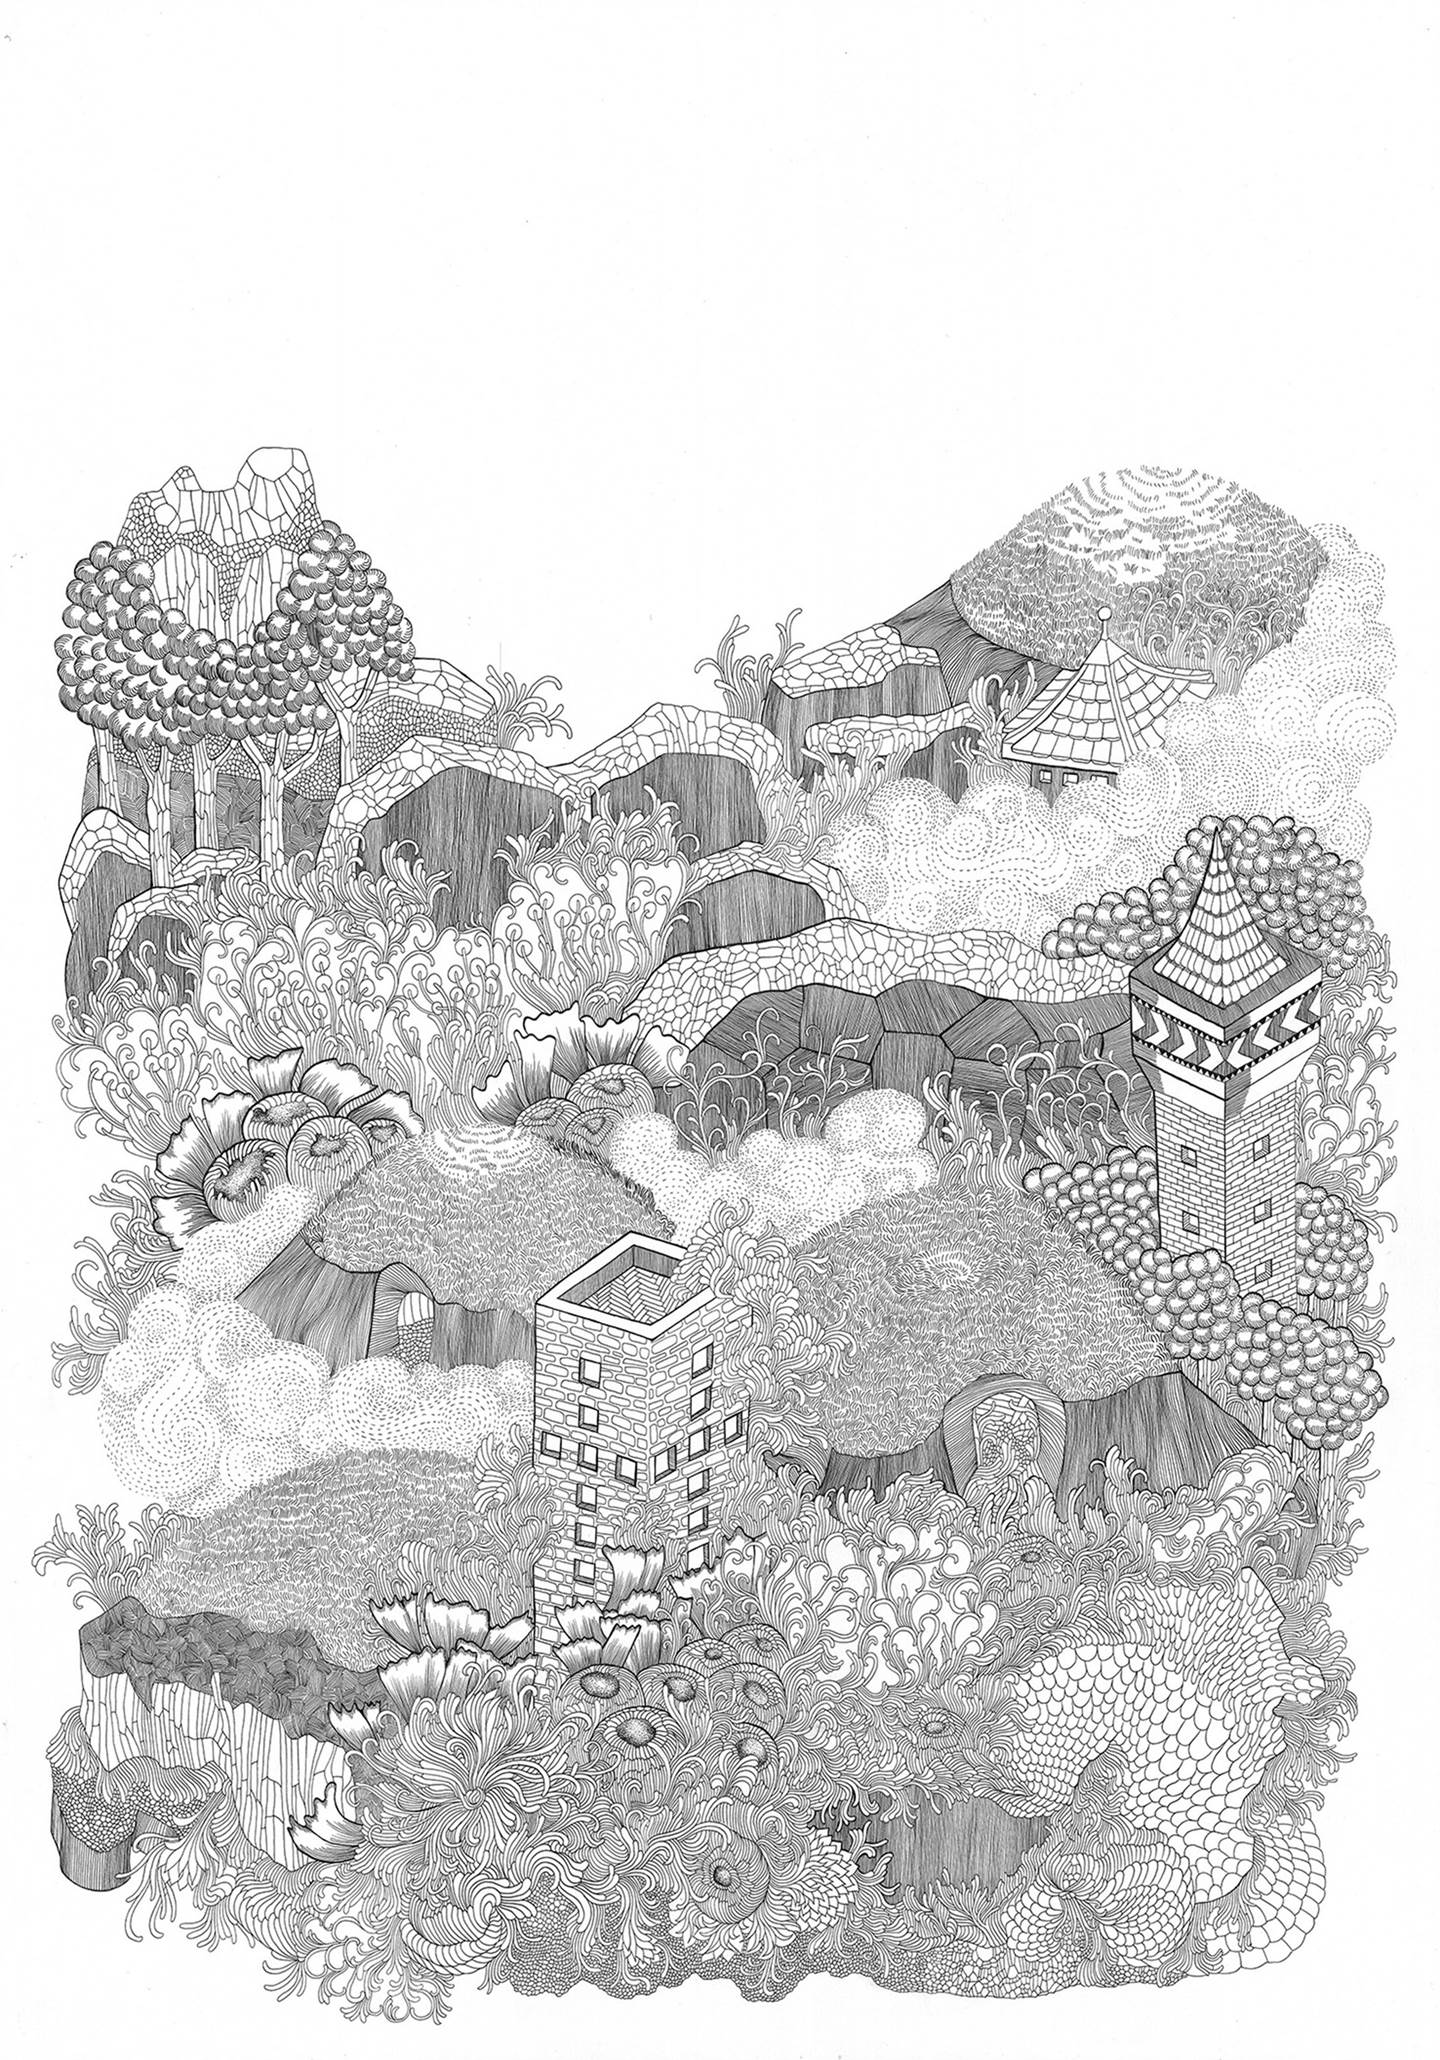 Atlantis #4, original Architecture Ink Drawing and Illustration by Anne Pangolin Guéno